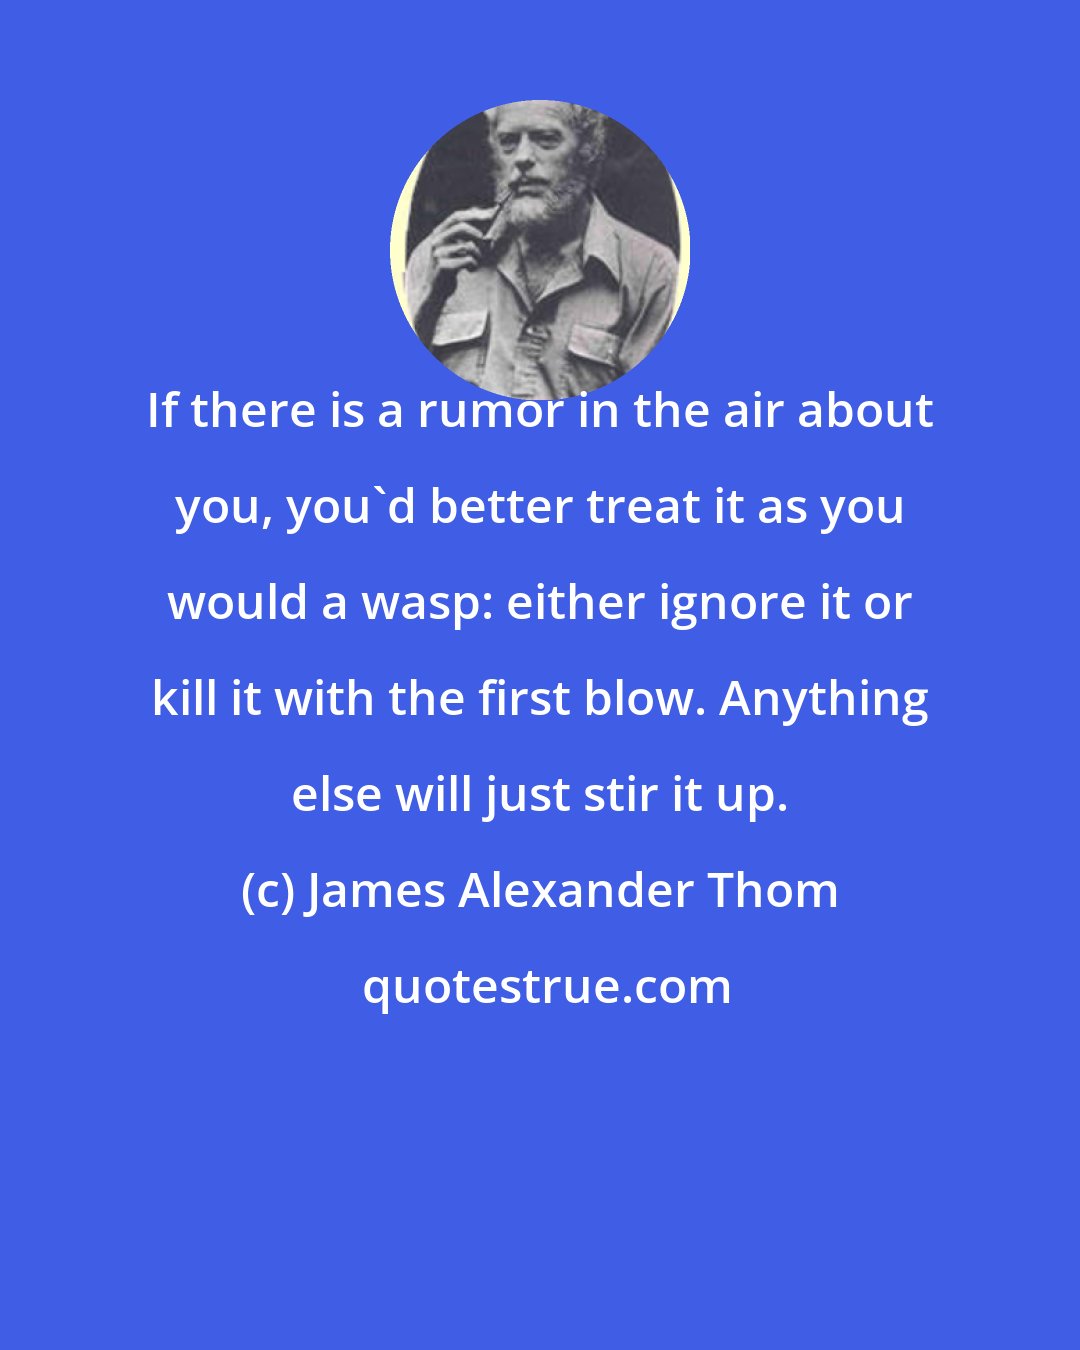 James Alexander Thom: If there is a rumor in the air about you, you'd better treat it as you would a wasp: either ignore it or kill it with the first blow. Anything else will just stir it up.